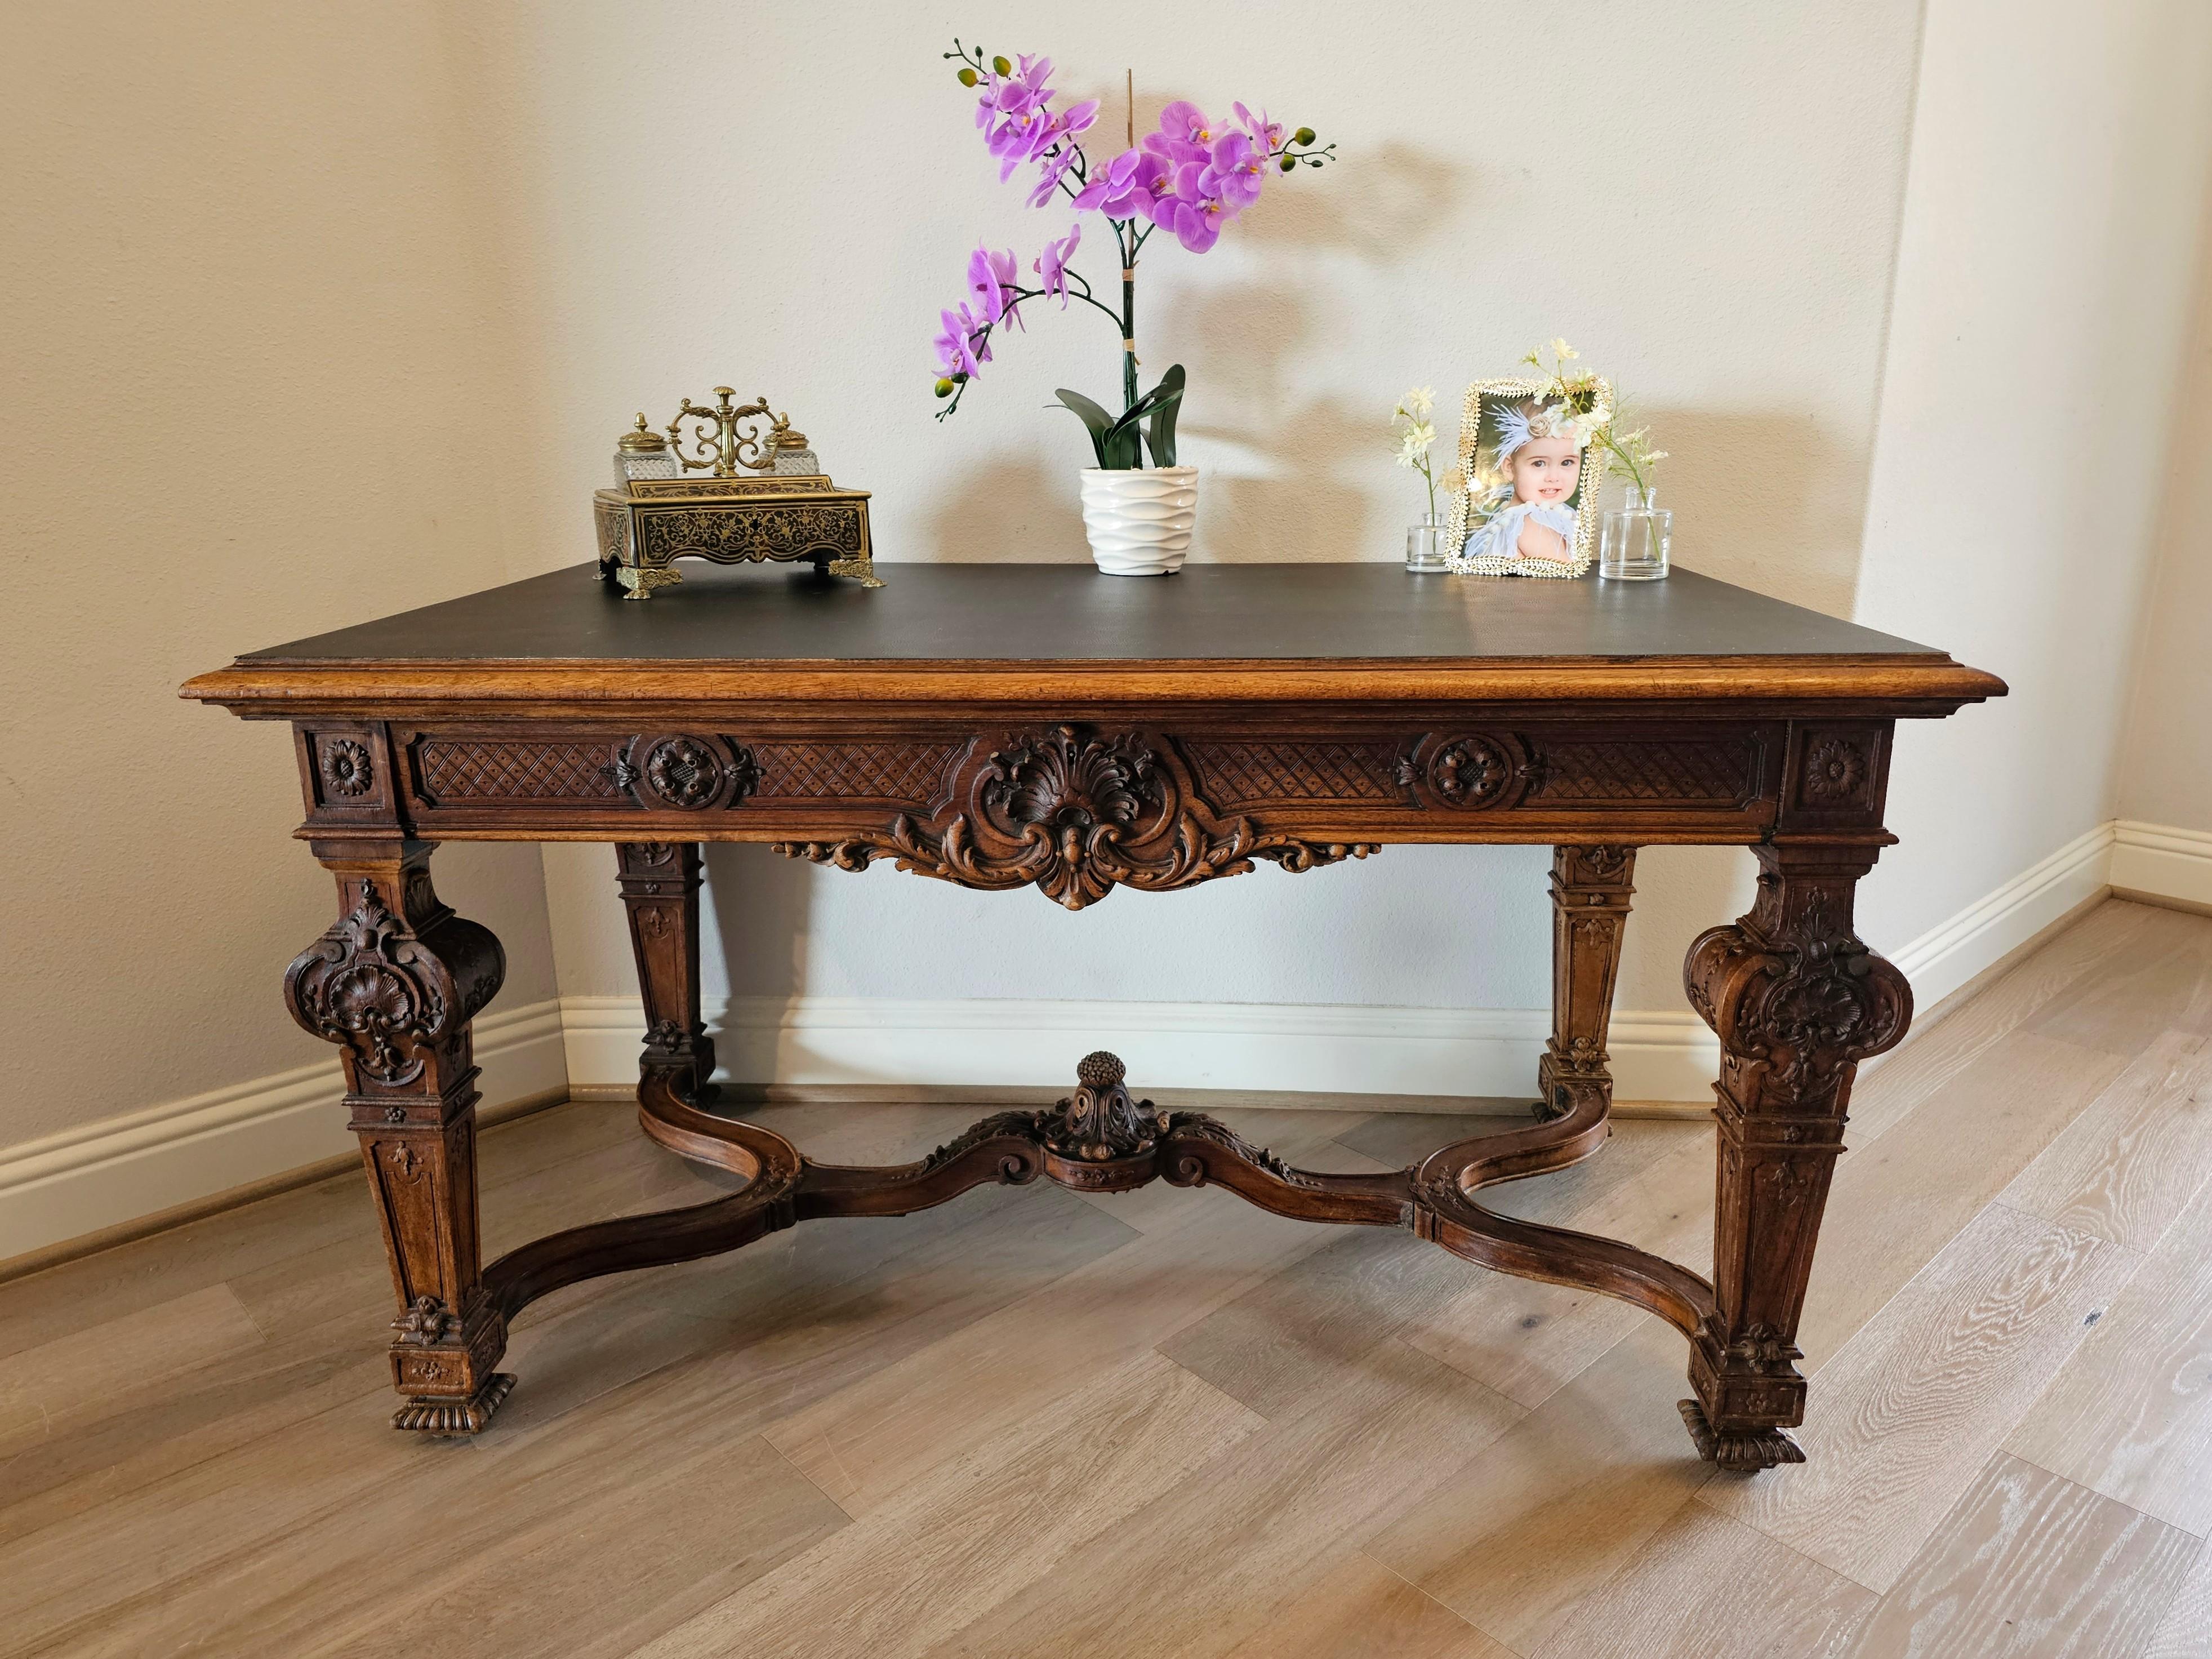 A finely carved French Louis XIV style walnut writing table. circa 1870

Hand carved in France in the late 19th century, exceptionally executed in grand King Louis 14th taste, hand-crafted out of solid walnut, high-quality craftsmanship and